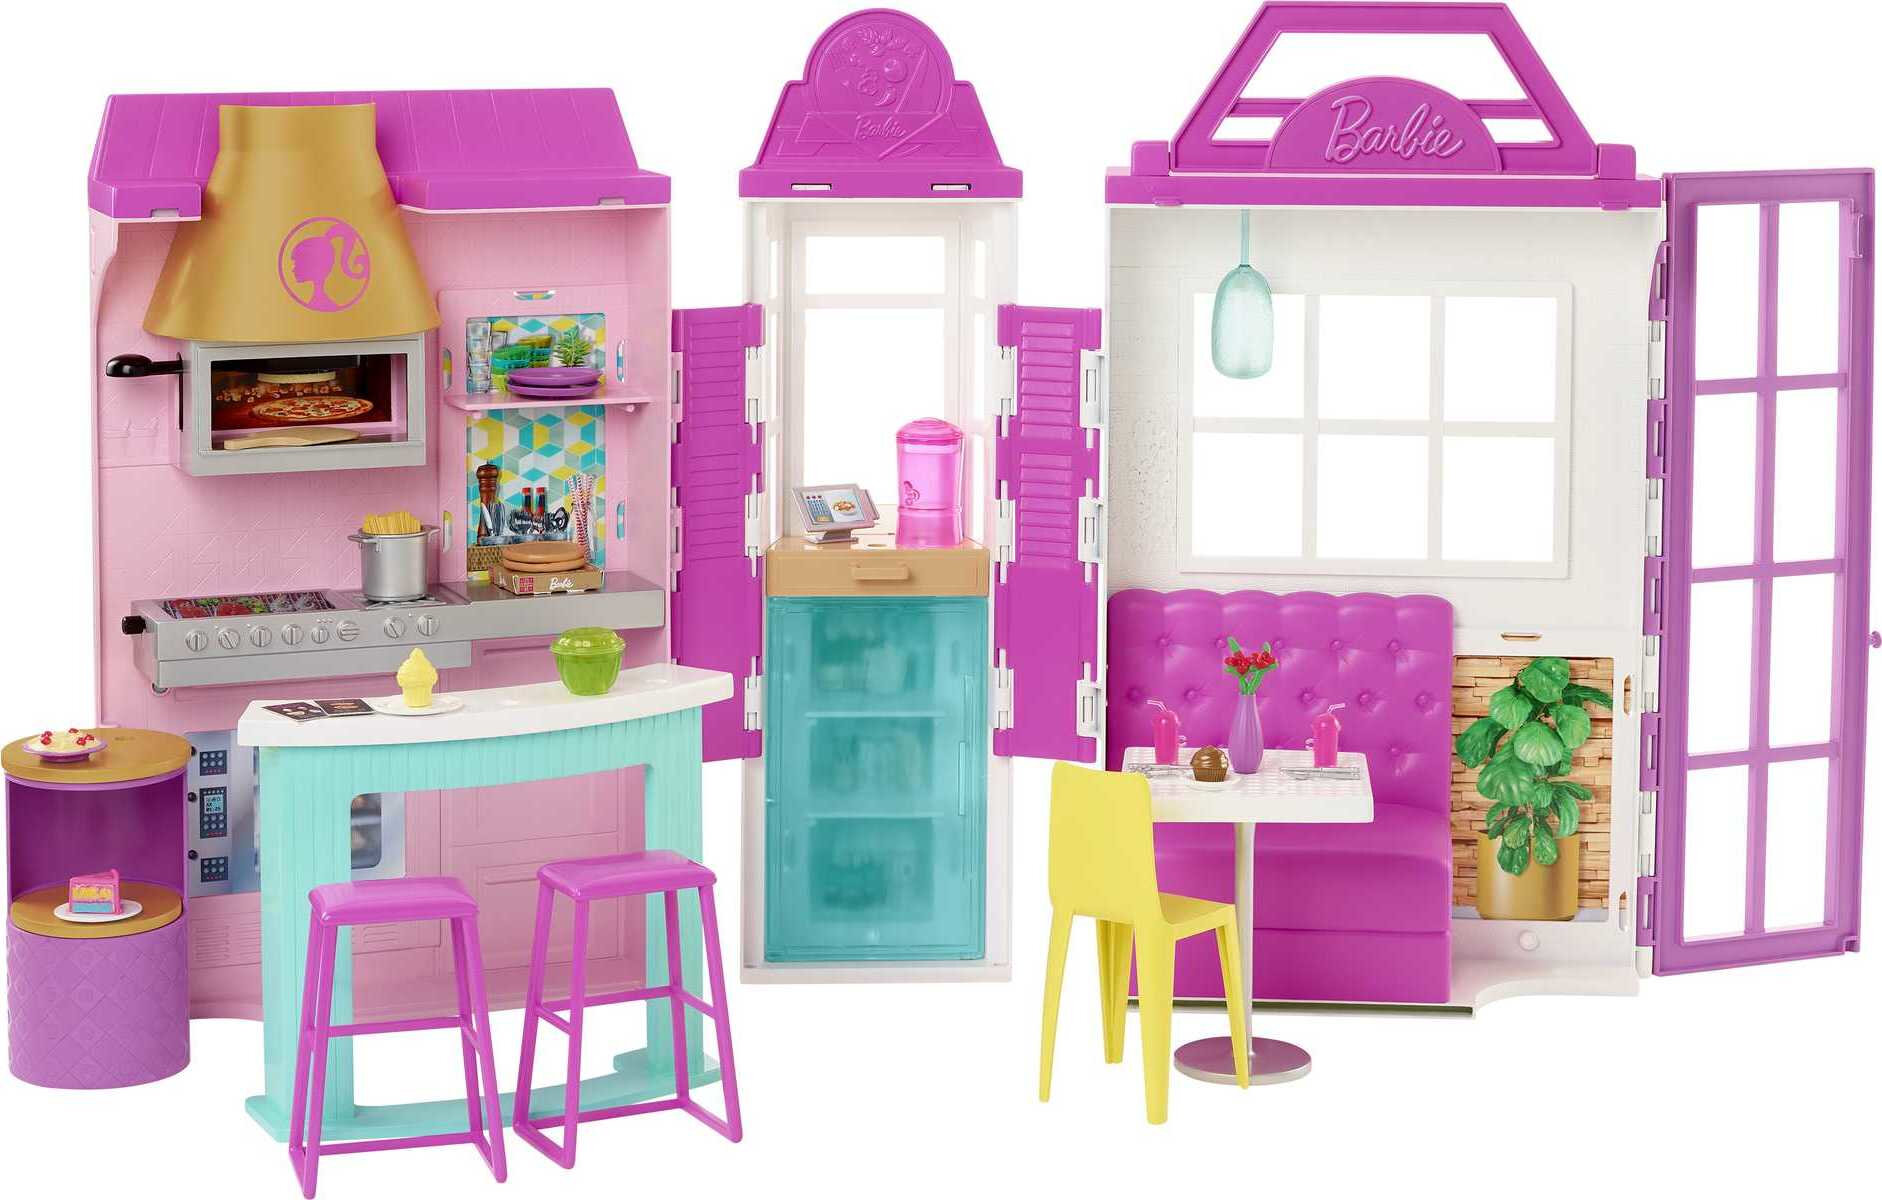 Barbie Cook ‘n Grill Restaurant Playset with 30+ Pieces Including Pizza Oven & Grill - image 1 of 7